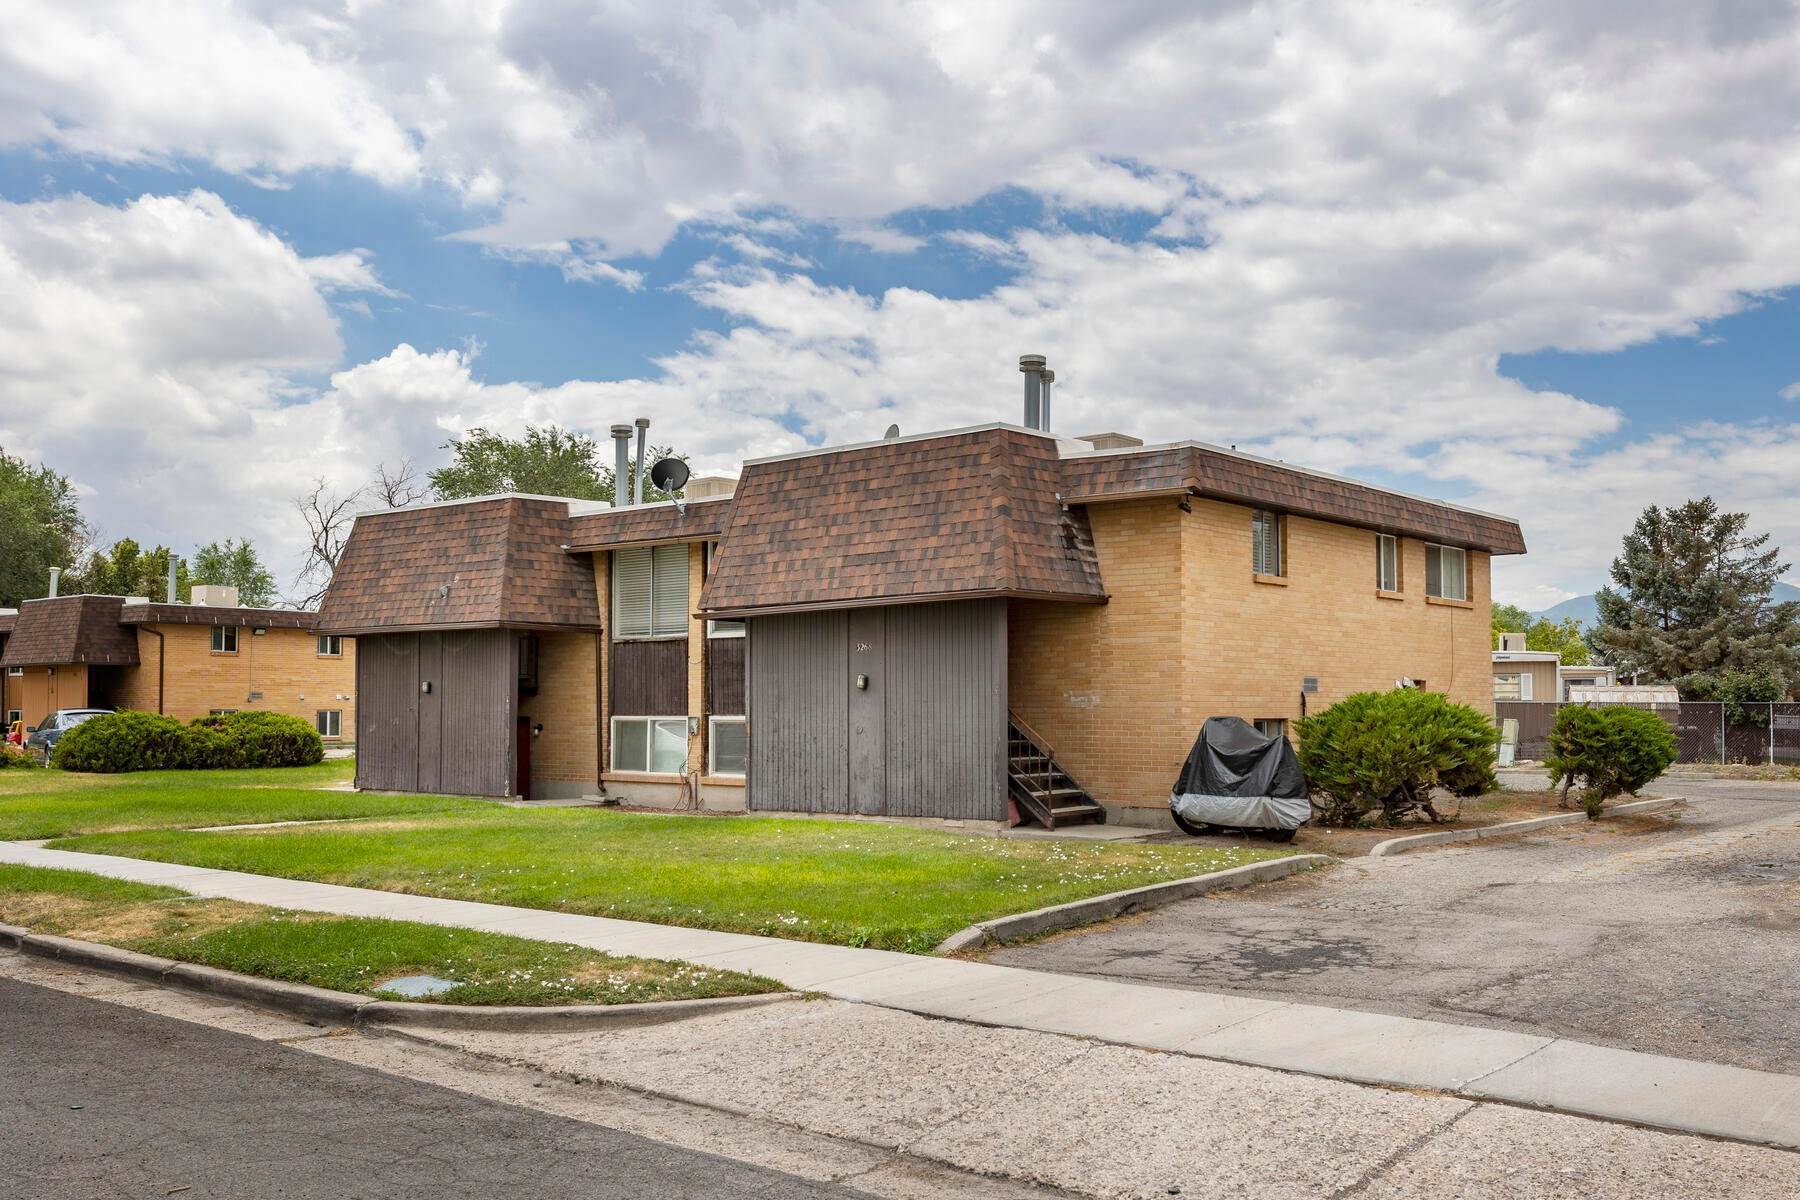 37. Multi-Family Homes for Sale at Well Maintained 4 Plex That Has Easy Access to the Freeway and Bus Routes 3268 South 4180 West Salt Lake City, Utah 84120 United States